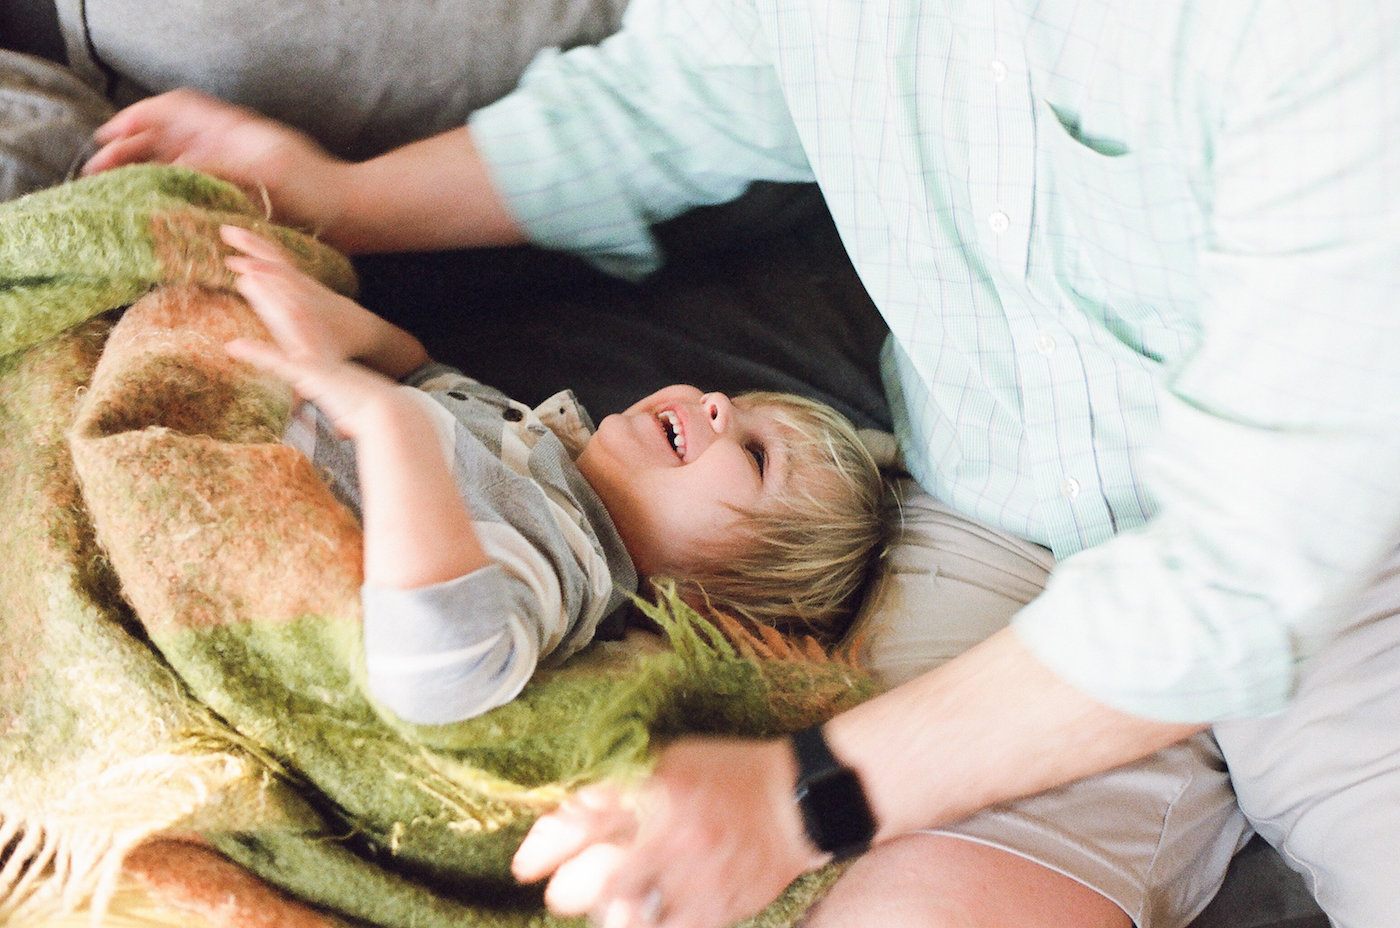 Family Lifestyle Photo Shoot with Hannah Groat // www.thehiveblog.com // #family #lifestyle #photography